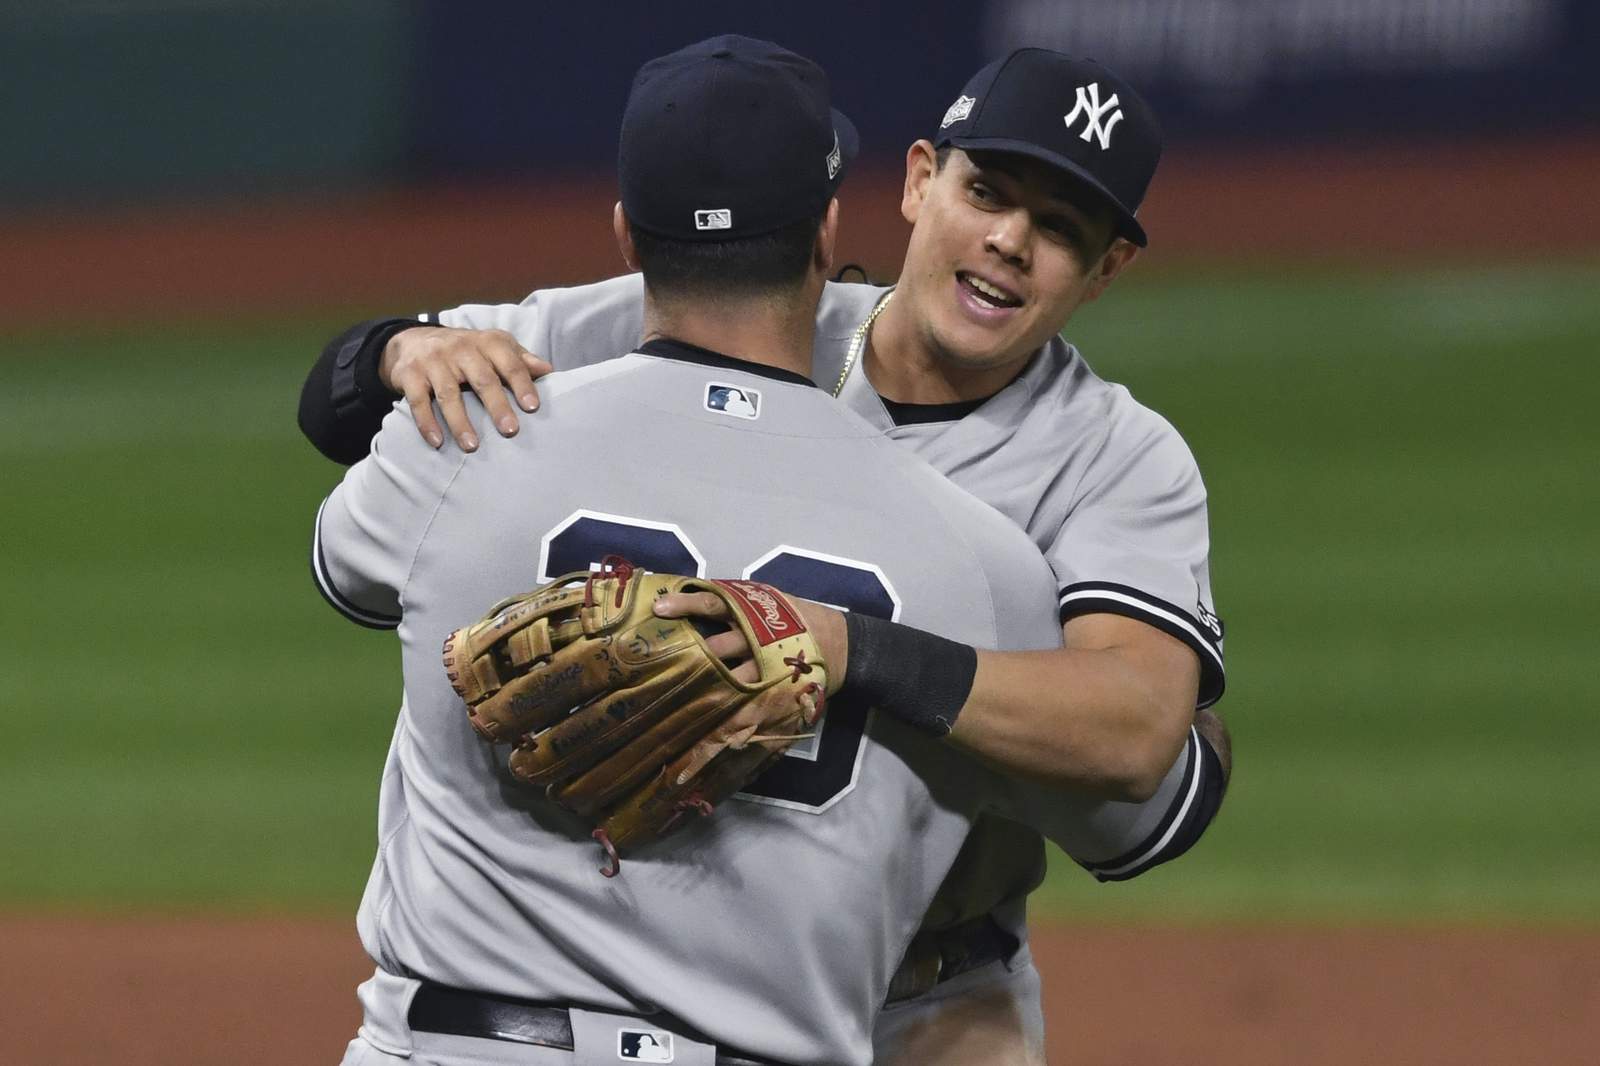 Yanks sweep Indians 10-9 in draining game, meet Rays in ALDS